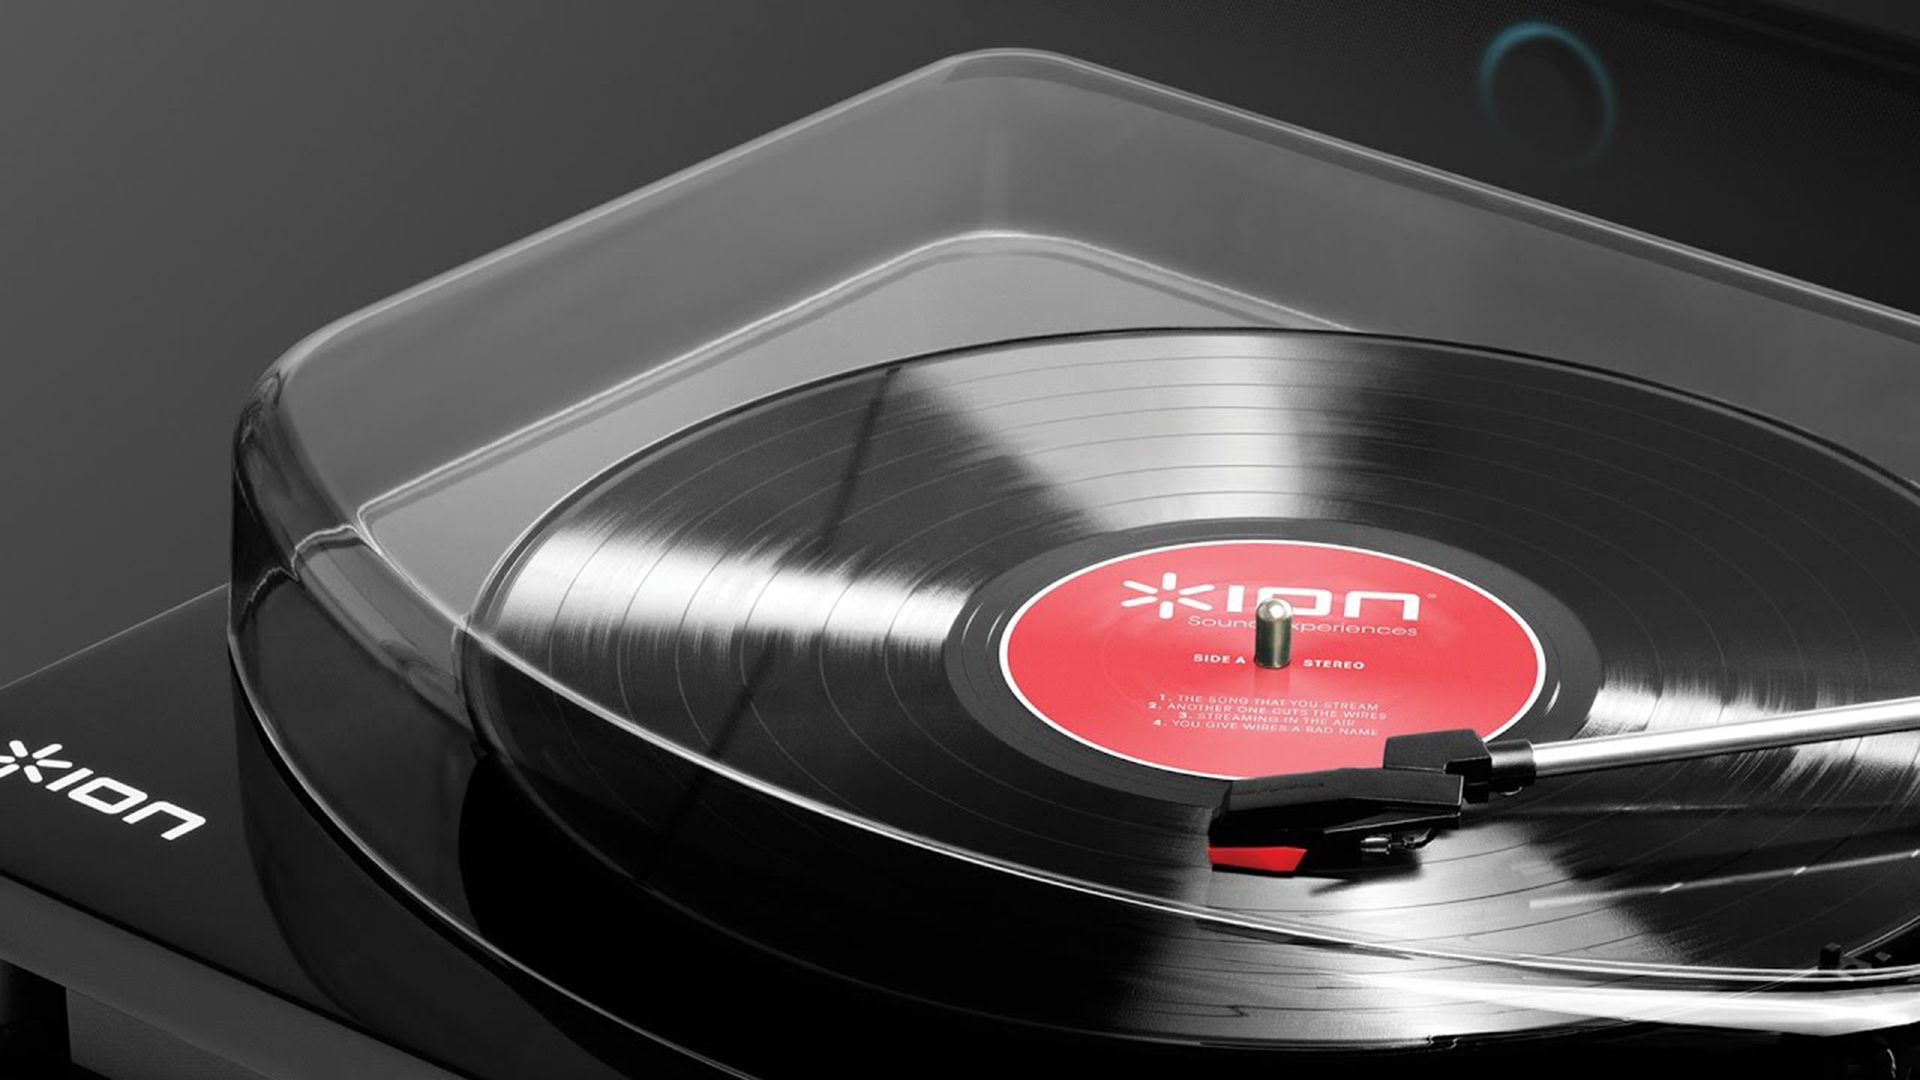 ion bluetooth record player